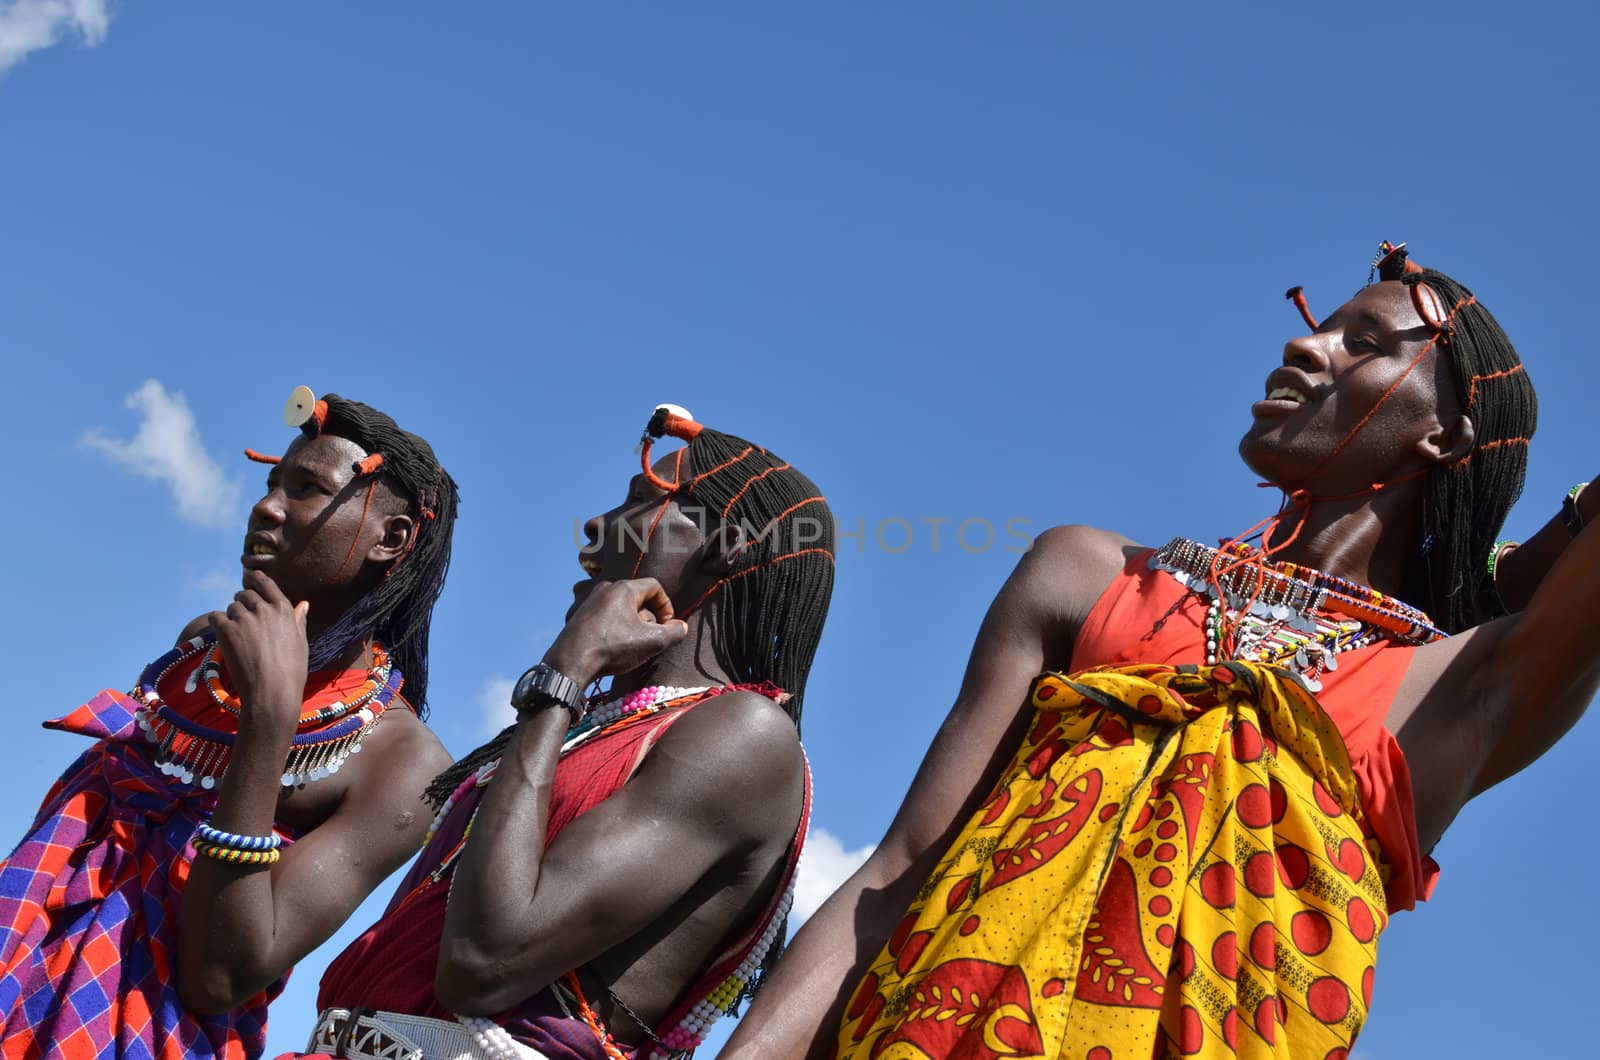 Village Masai Mara, Kenya - October 17, 2011: A yuong Masai welcomes tourists with the traditional jumping ceremony .